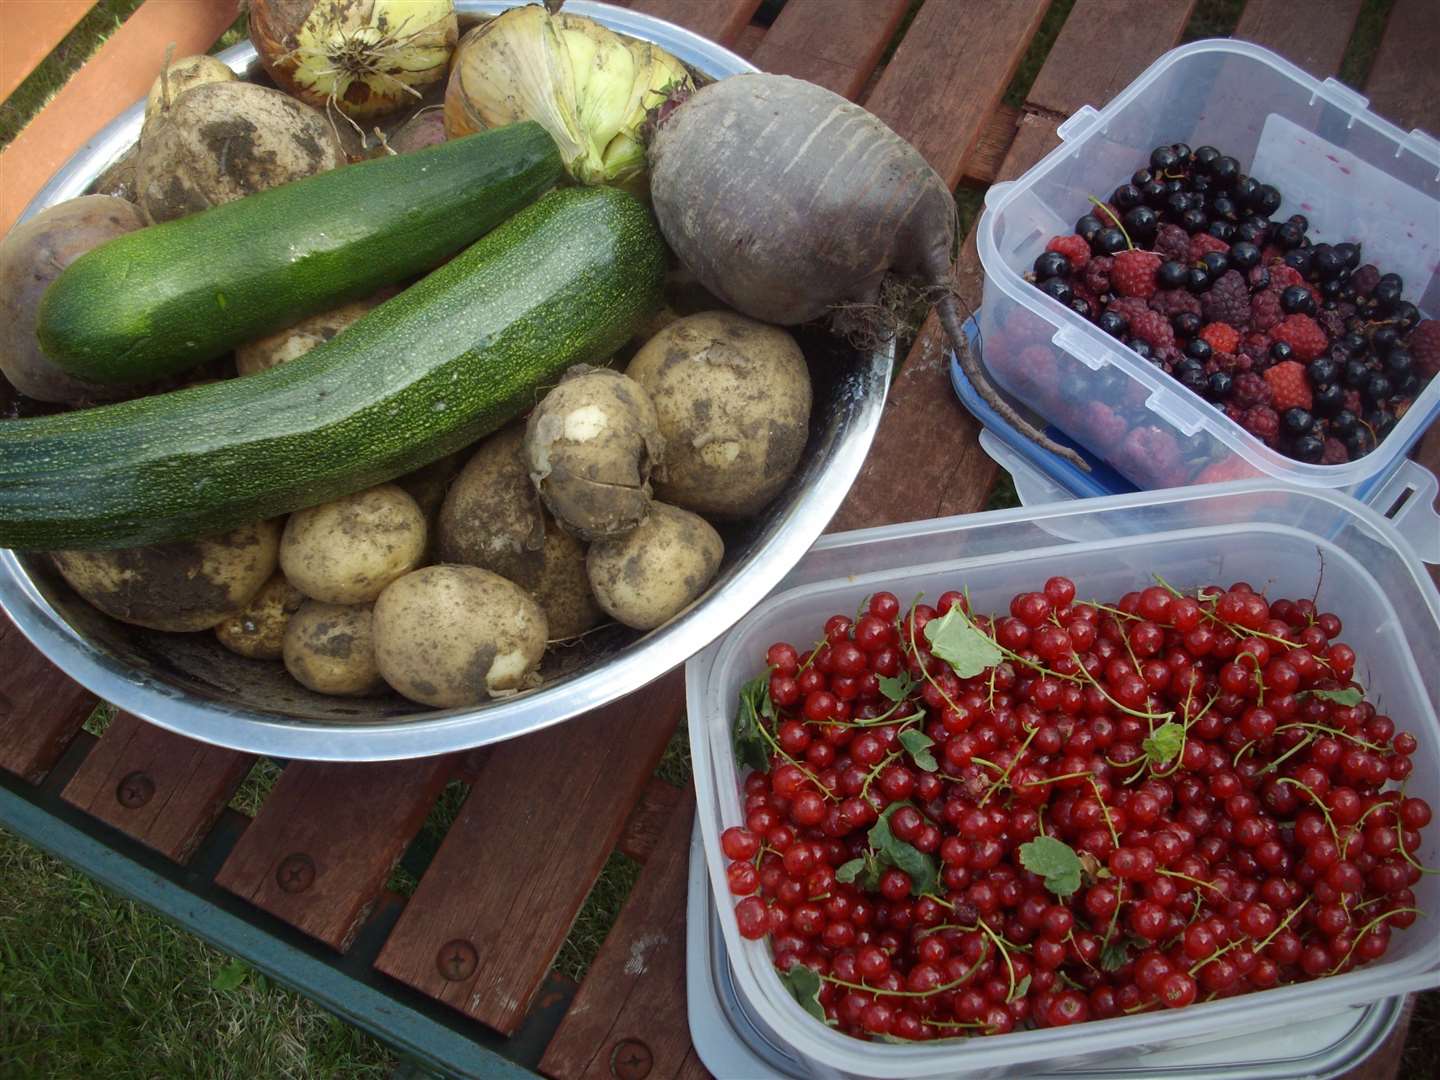 Mrs Parkin has been praised by some other allotment owners for generously giving away some of her produce